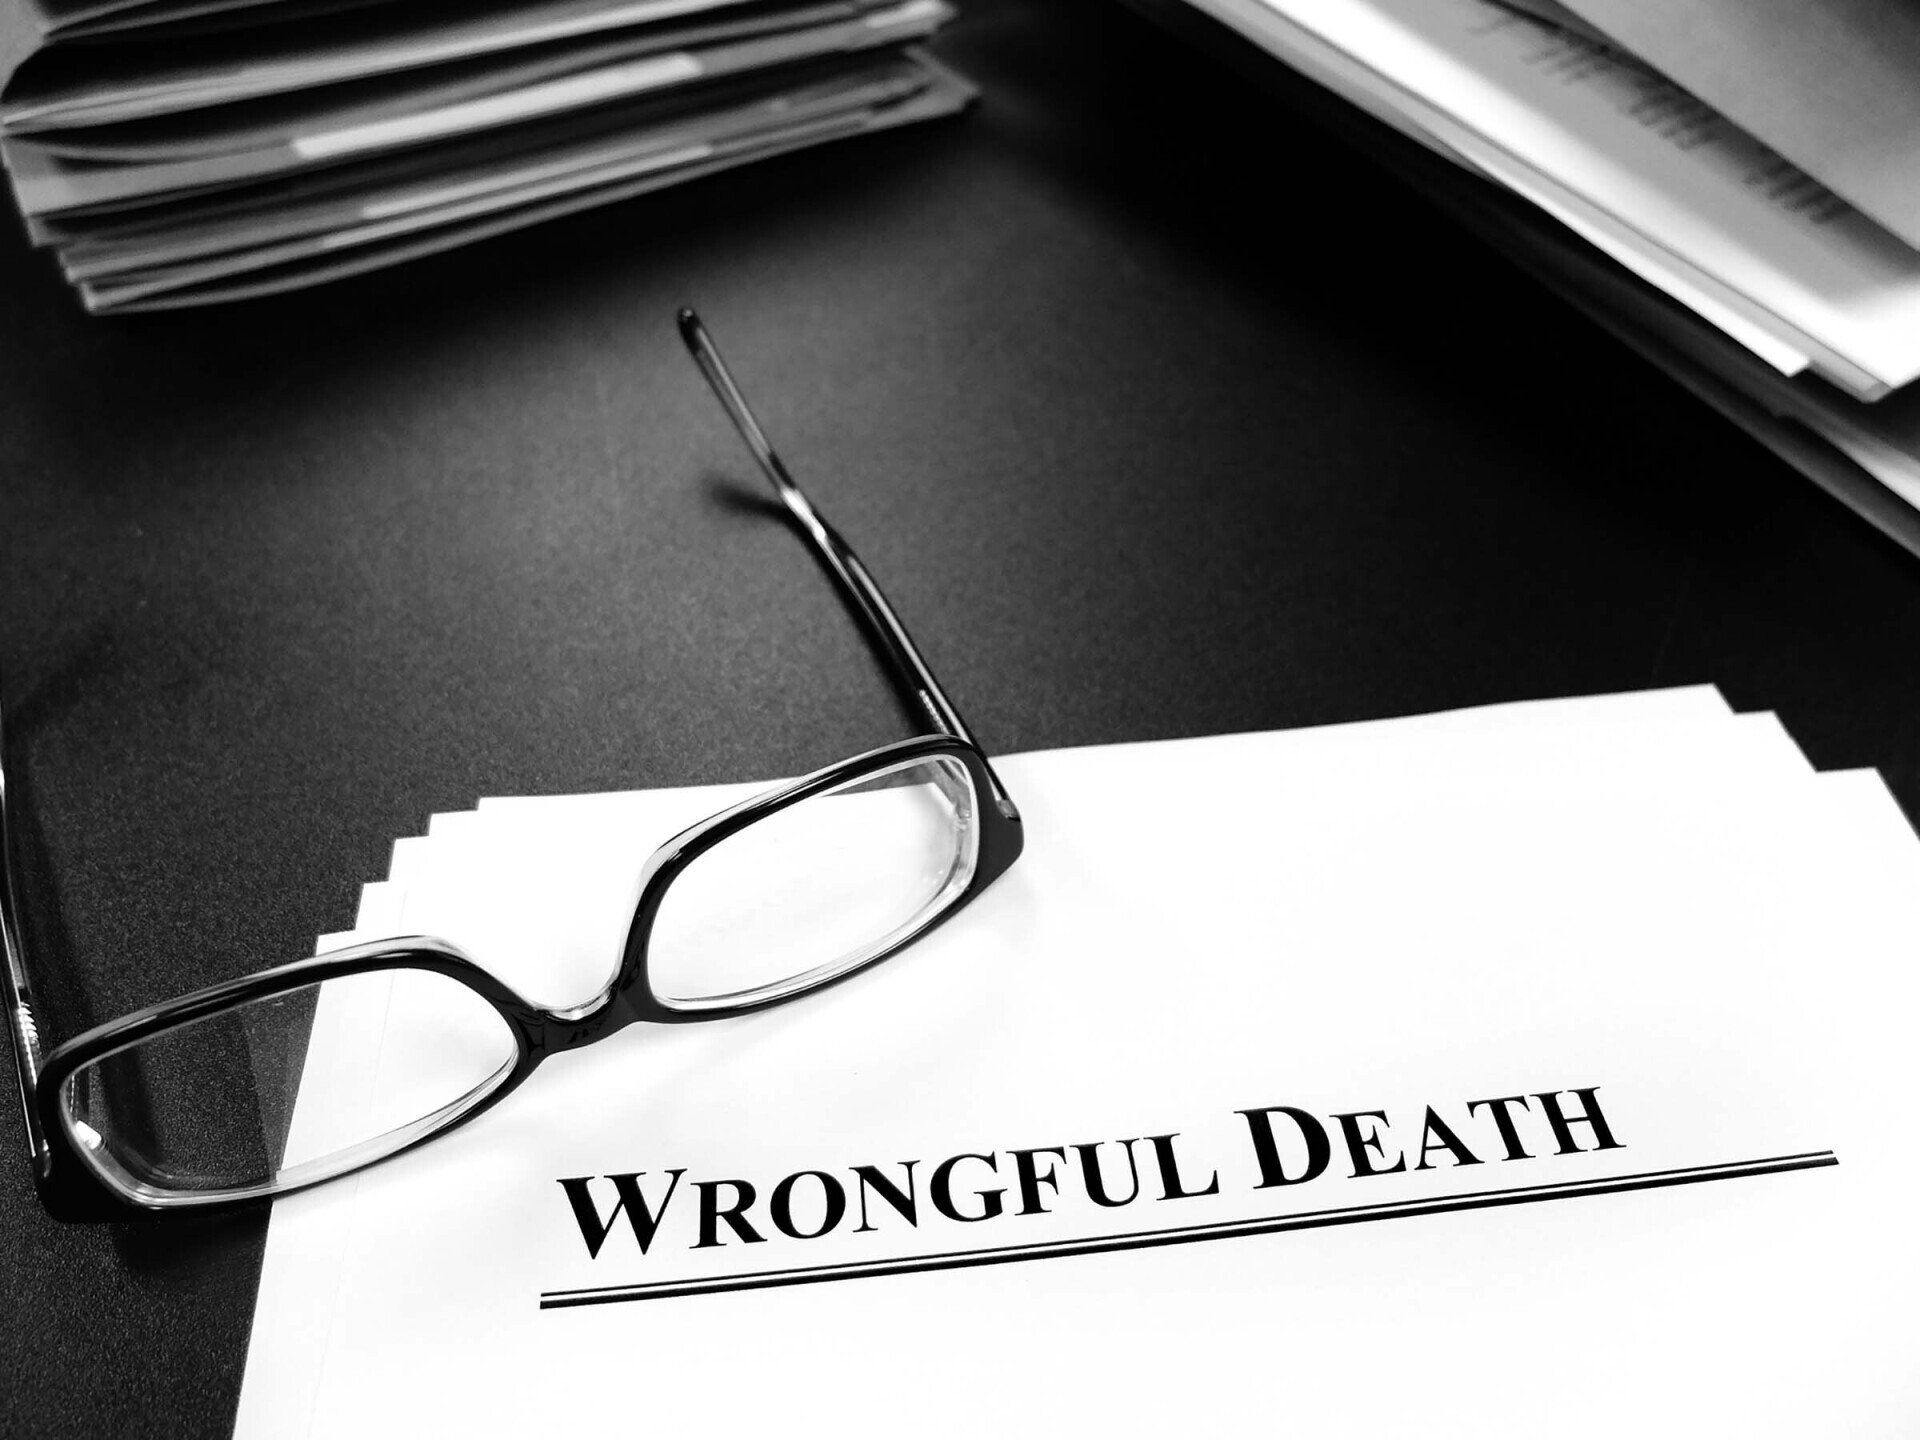 Wrongful Death Papers On Desk For Lawsuit With Glasses - Detroit, MI - Frederic M Rosen, PC Attorney At Law